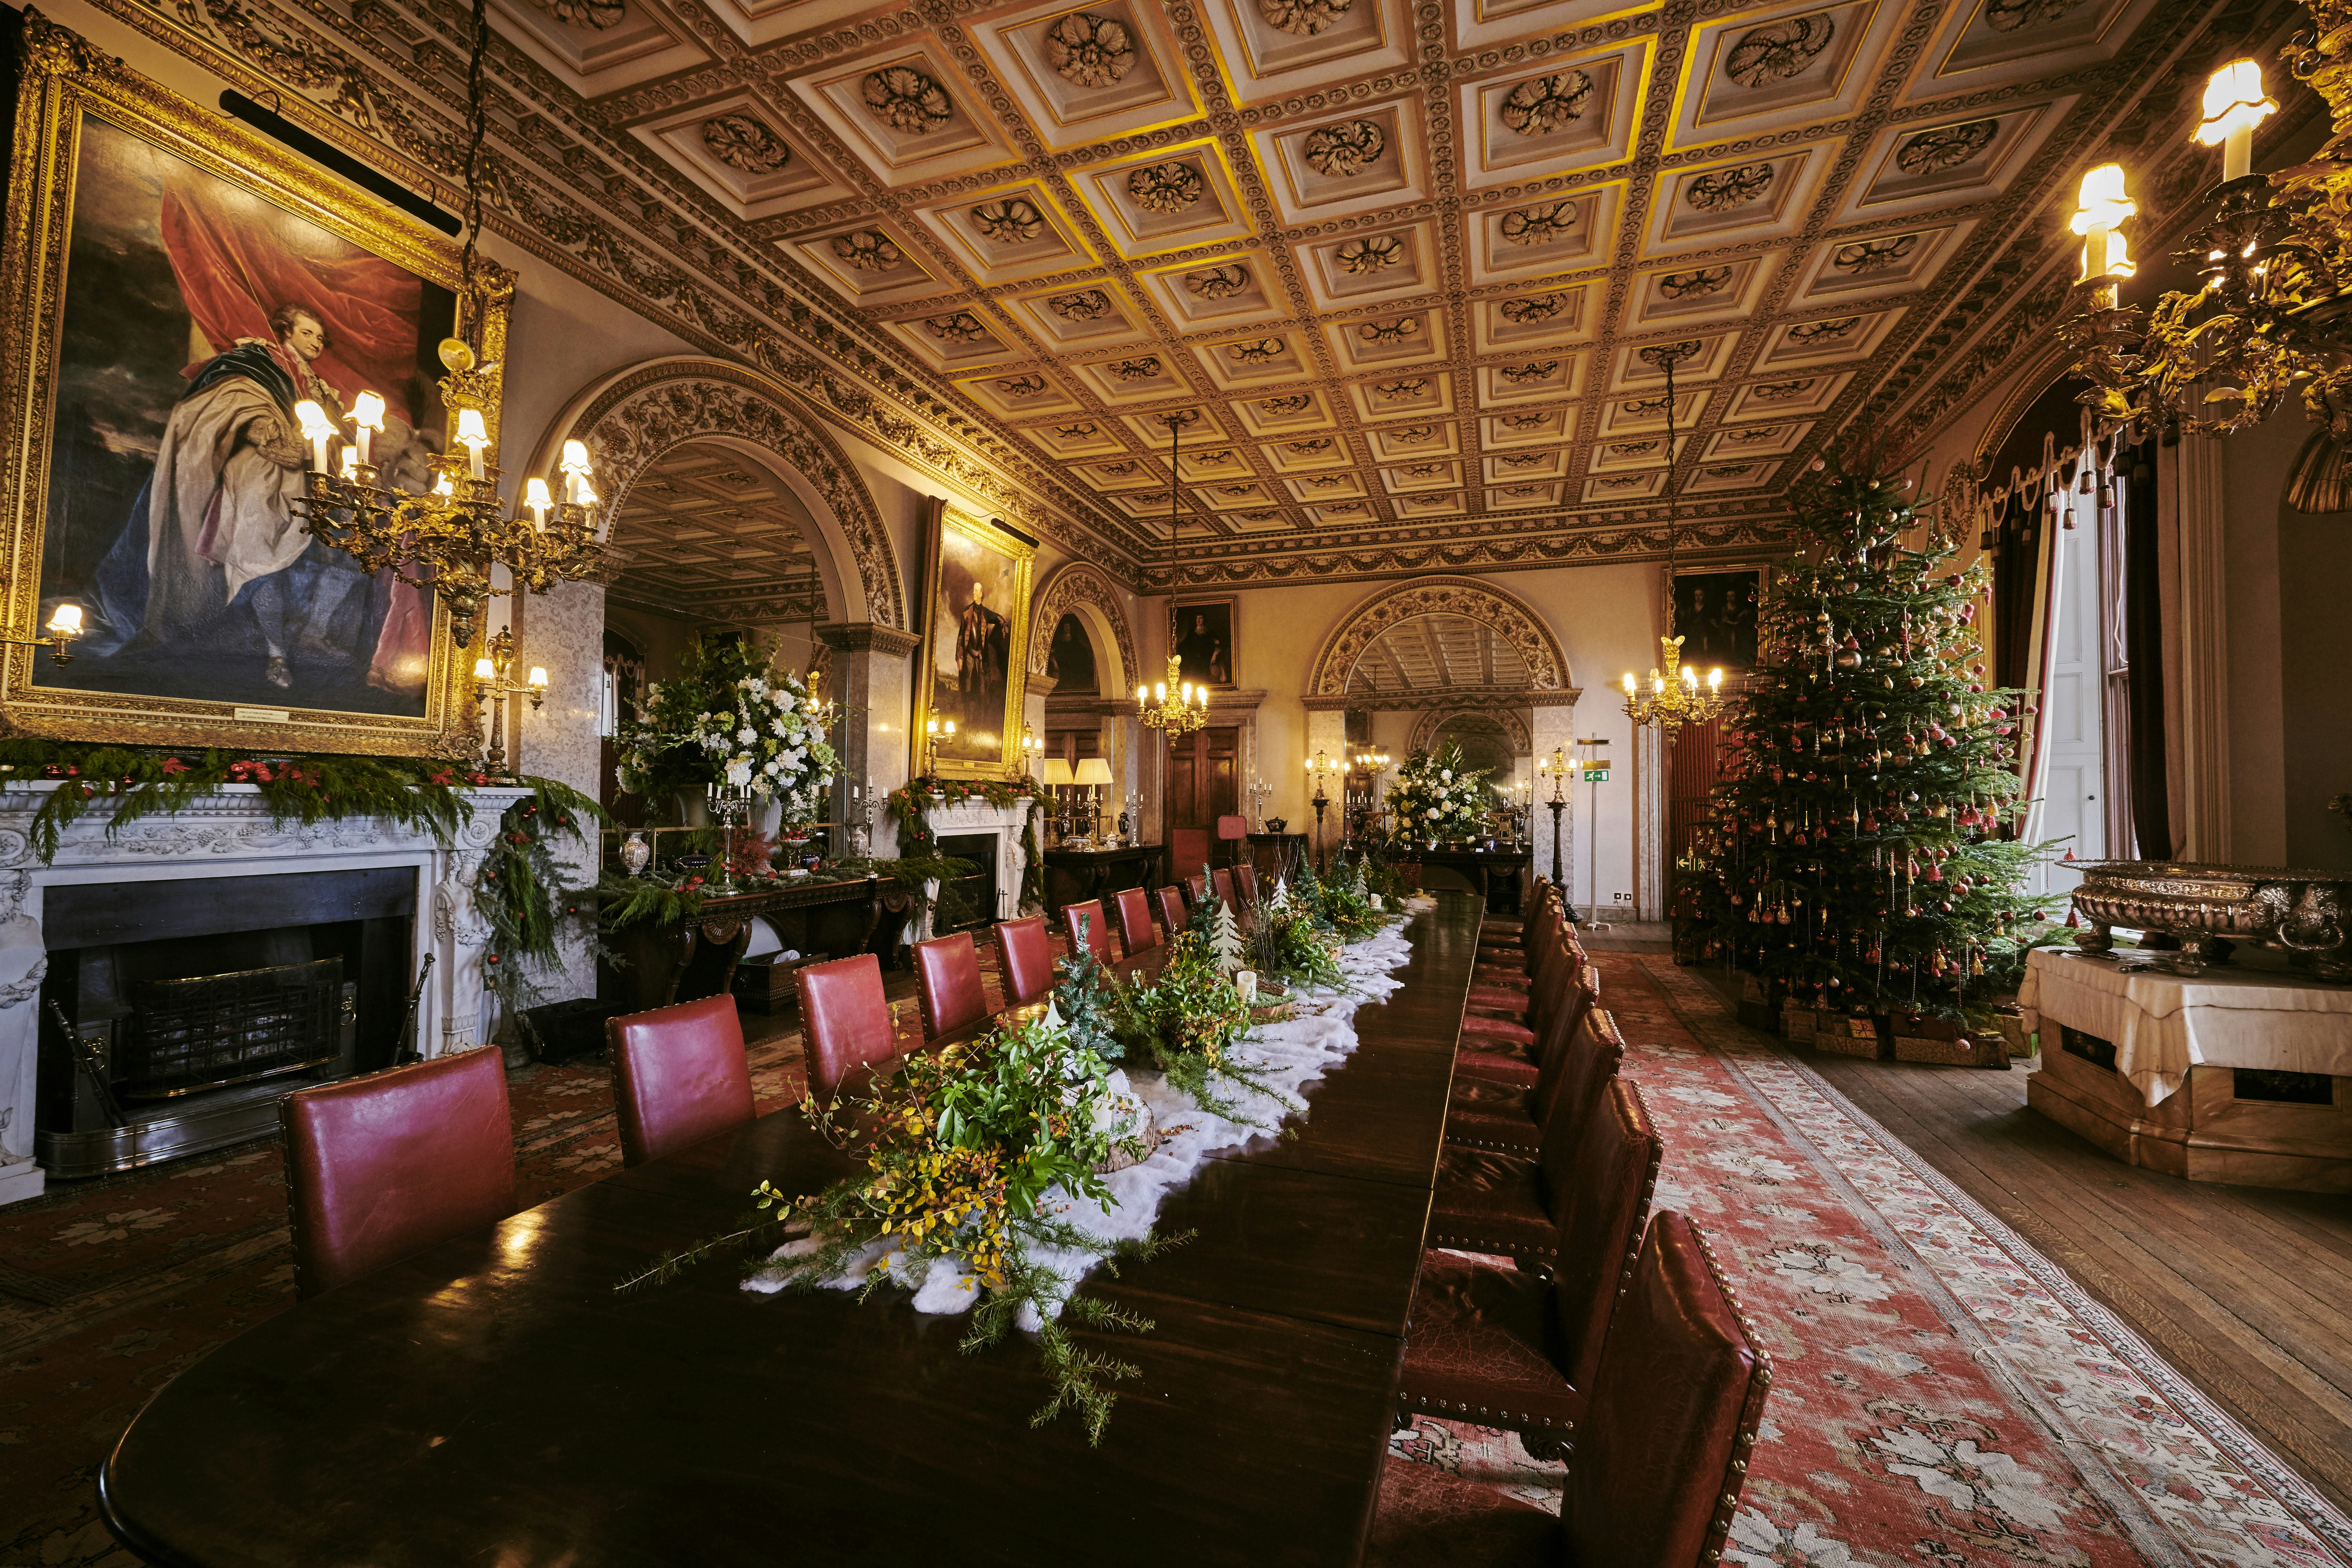 A view of the main dining room of the castle, decorated for Christmas